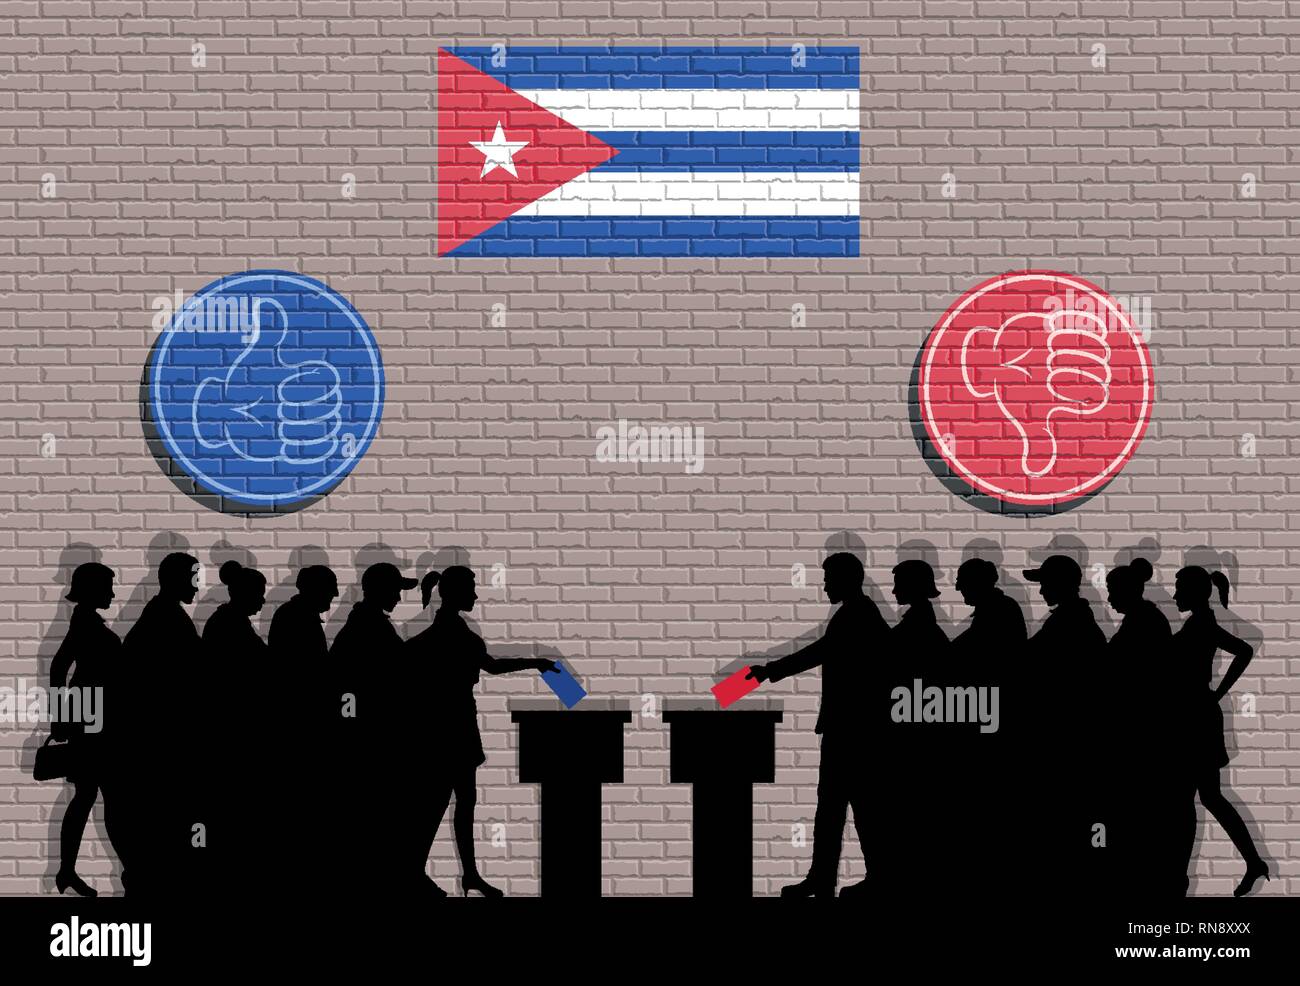 Cuban voters crowd silhouette in election with thumb icons and Cuba flag graffiti. All the silhouette objects, icons and background are in different l Stock Vector